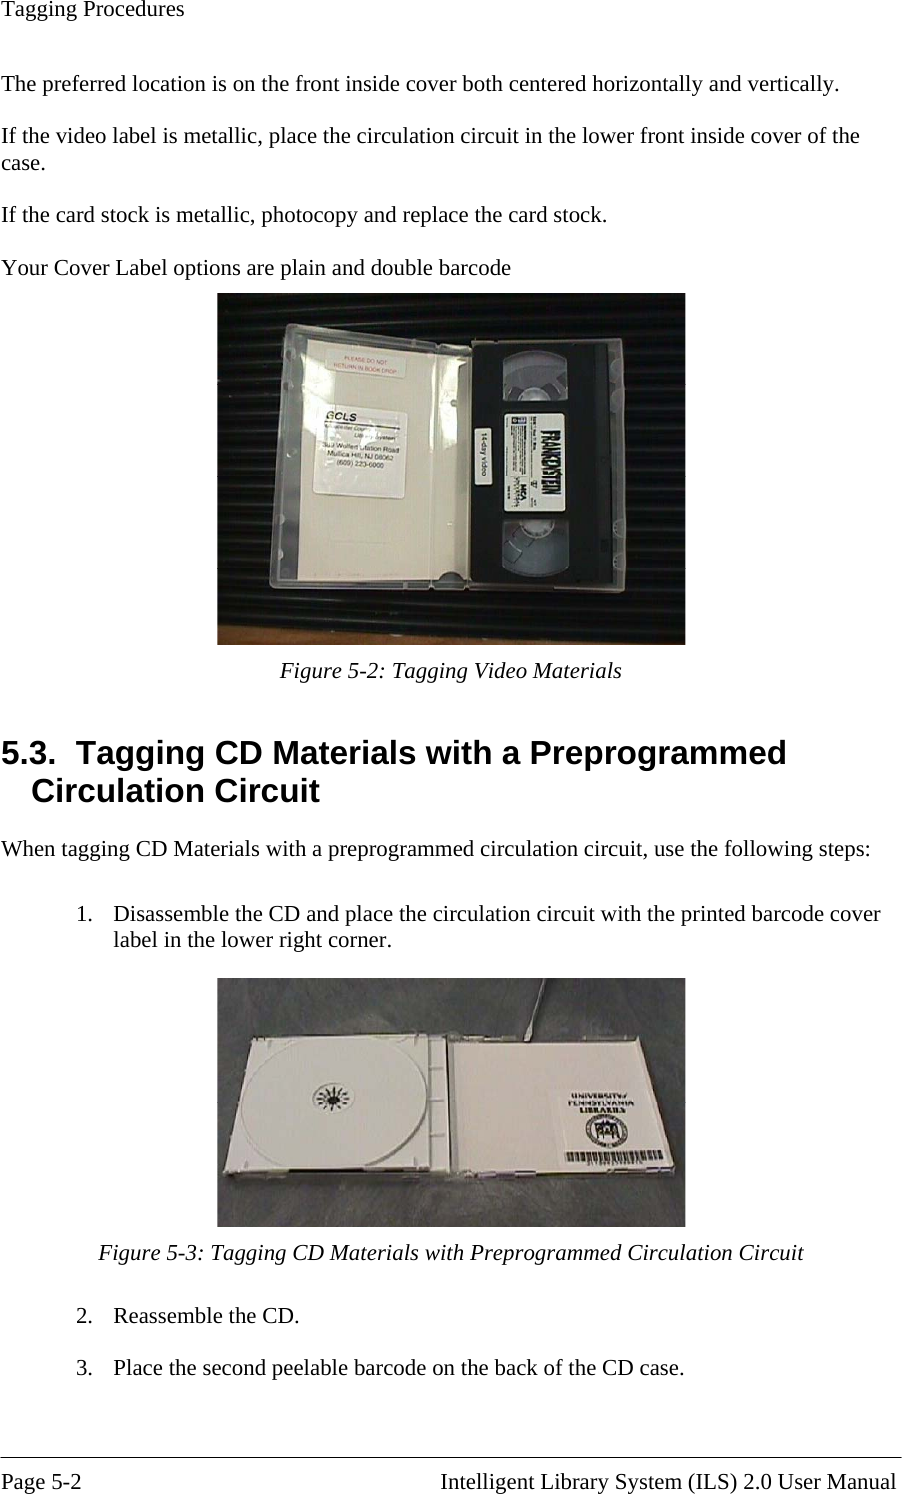 Tagging Procedures The preferred location is on the front inside cover both centered horizontally and vertically.  the video label is metallic, place the circulation circuit in the lower front inside cover of the  If the ca our Cover Label options are plain and double barcode  Ifcase. rd stock is metallic, photocopy and replace the card stock. Y  Figure 5-2: Tagging Video Materials 5.3.  Tagging CD Materials with a Preprogrammed ng CD Materials with a preprogrammed circulation circuit, use the following steps:  1.   Circulation Circuit When taggiDisassemble the CD and place the circulation circuit with the printed barcode coverlabel in the lower right corner.  Figure 5-3: Tagging CD Materials with Preprogrammed Circulation Circuit .  Reassemble the CD. .  Place the second peelable barcode on the back of the CD case.  23 Page 5-2                                                       Intelligent Library System (ILS) 2.0 User Manual 